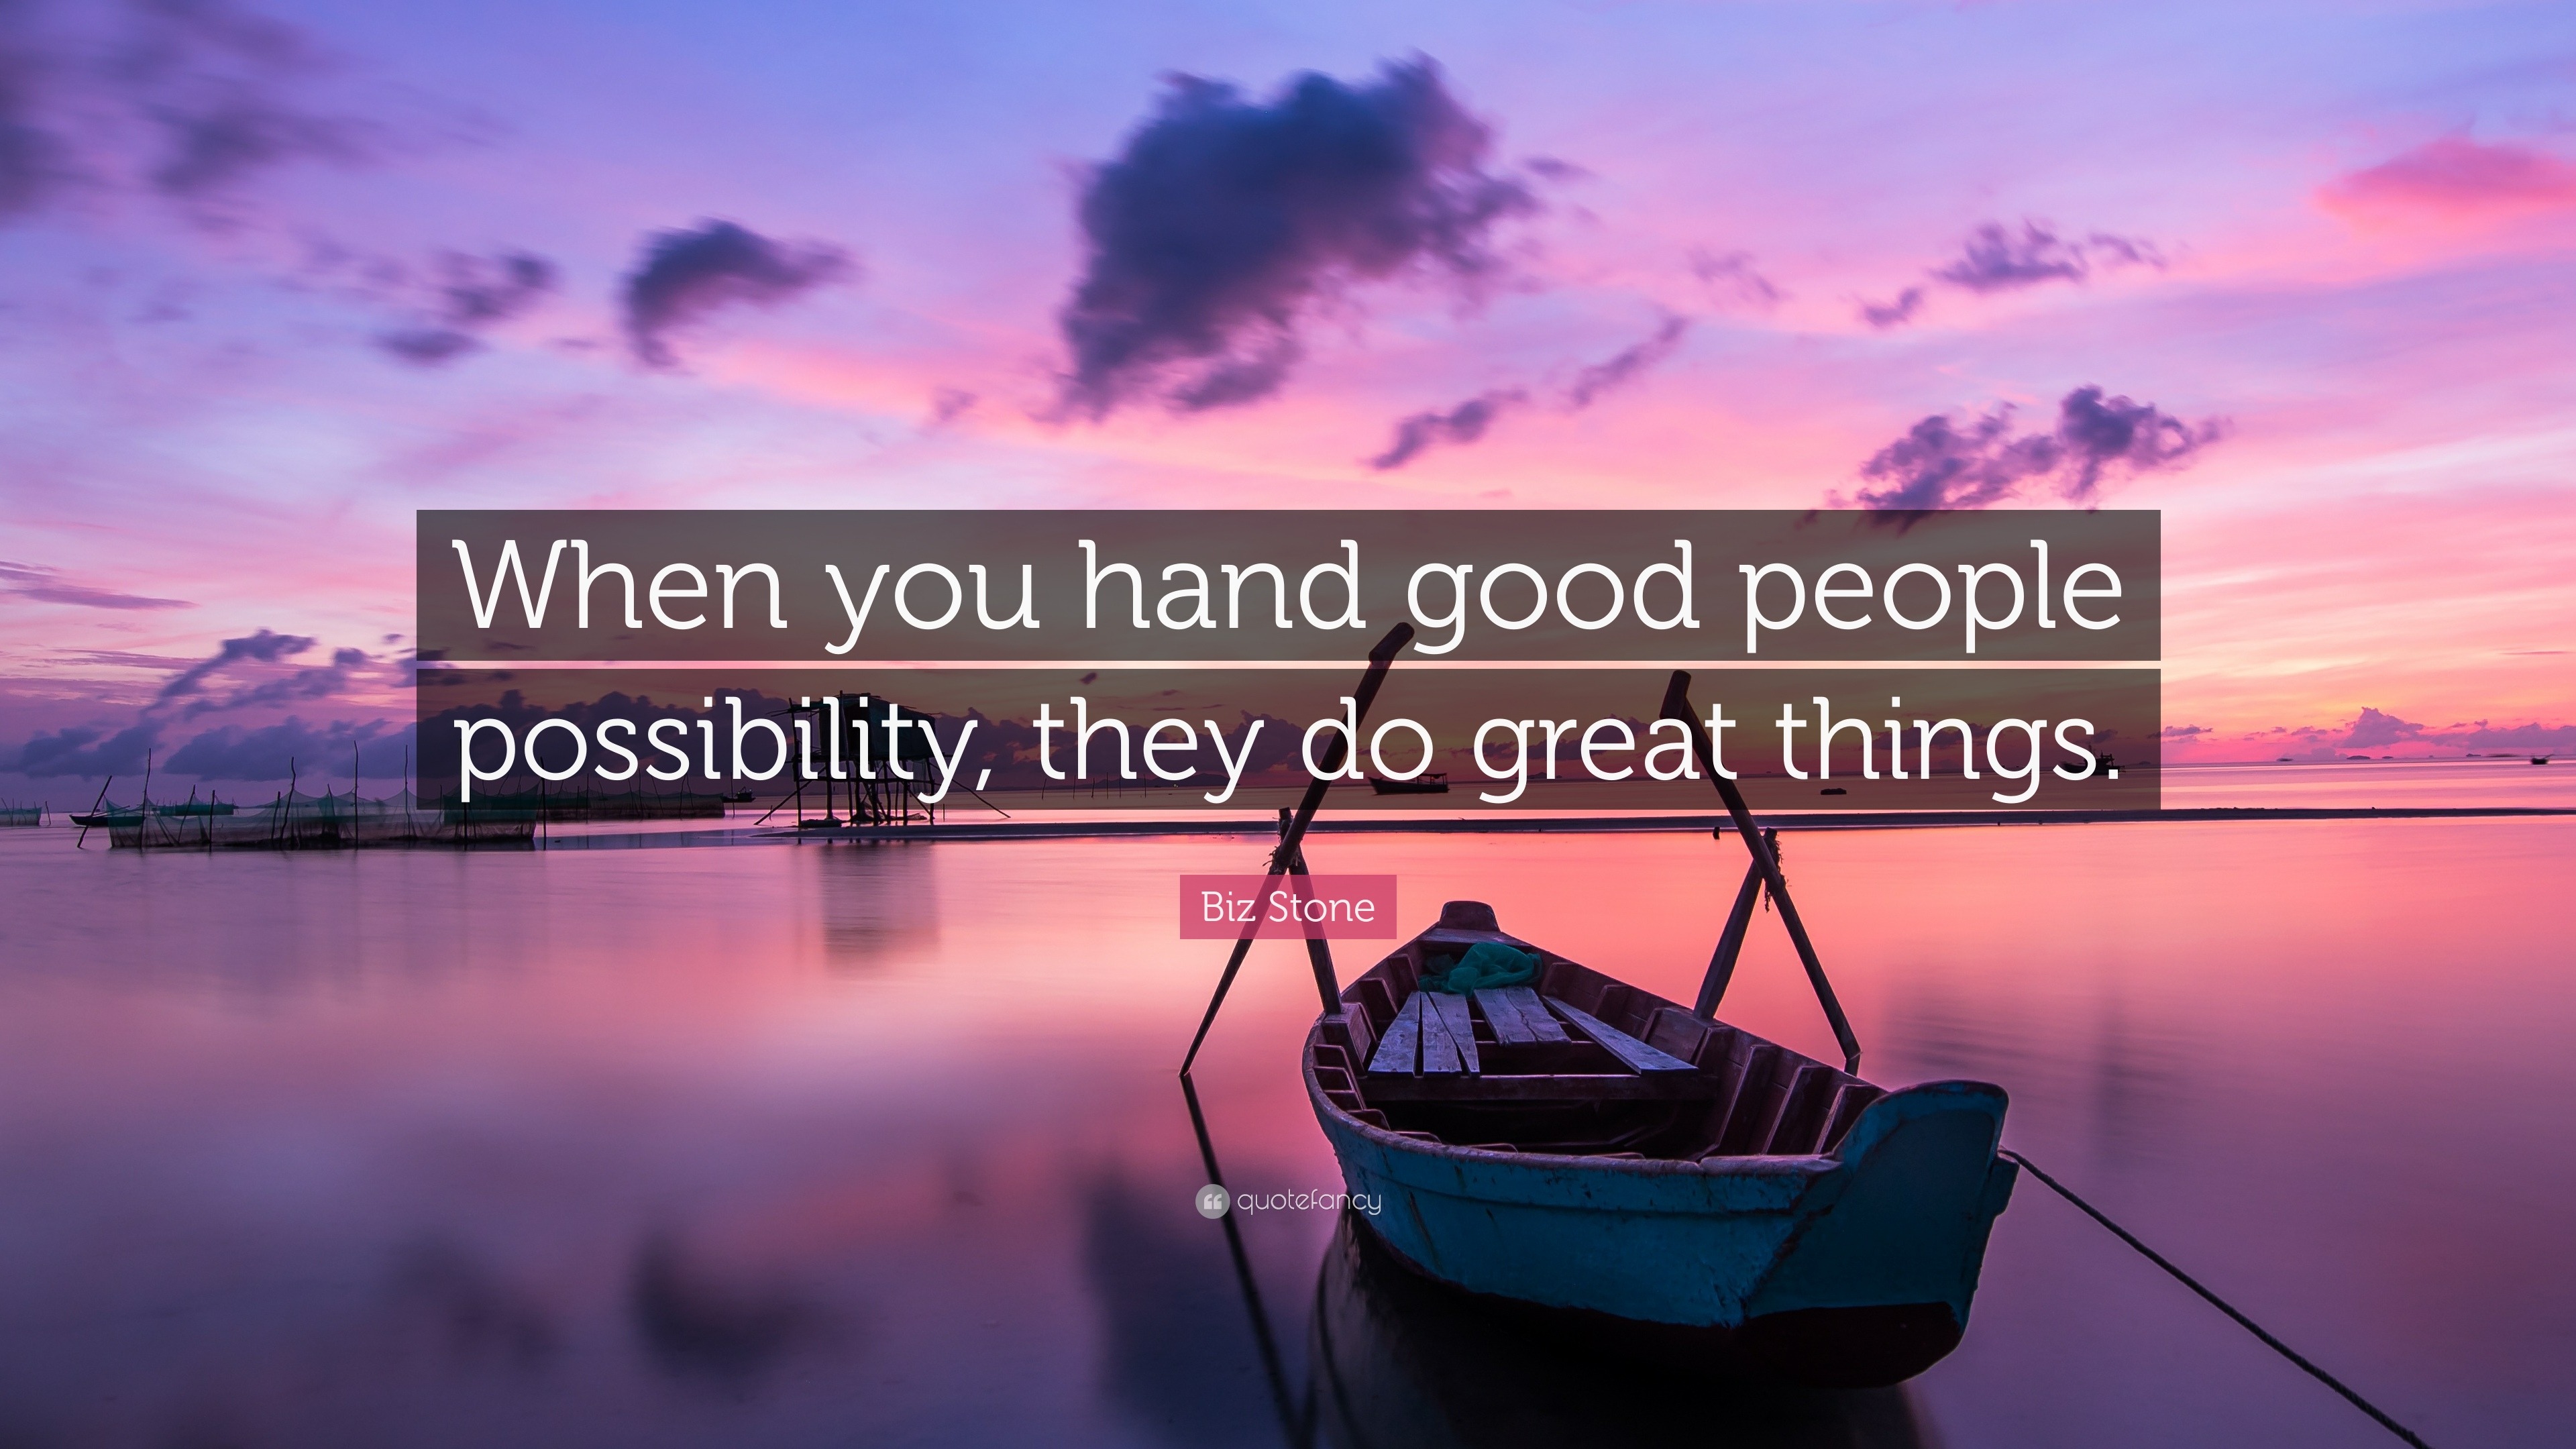 Biz Stone Quote: “When you hand good people possibility, they do great